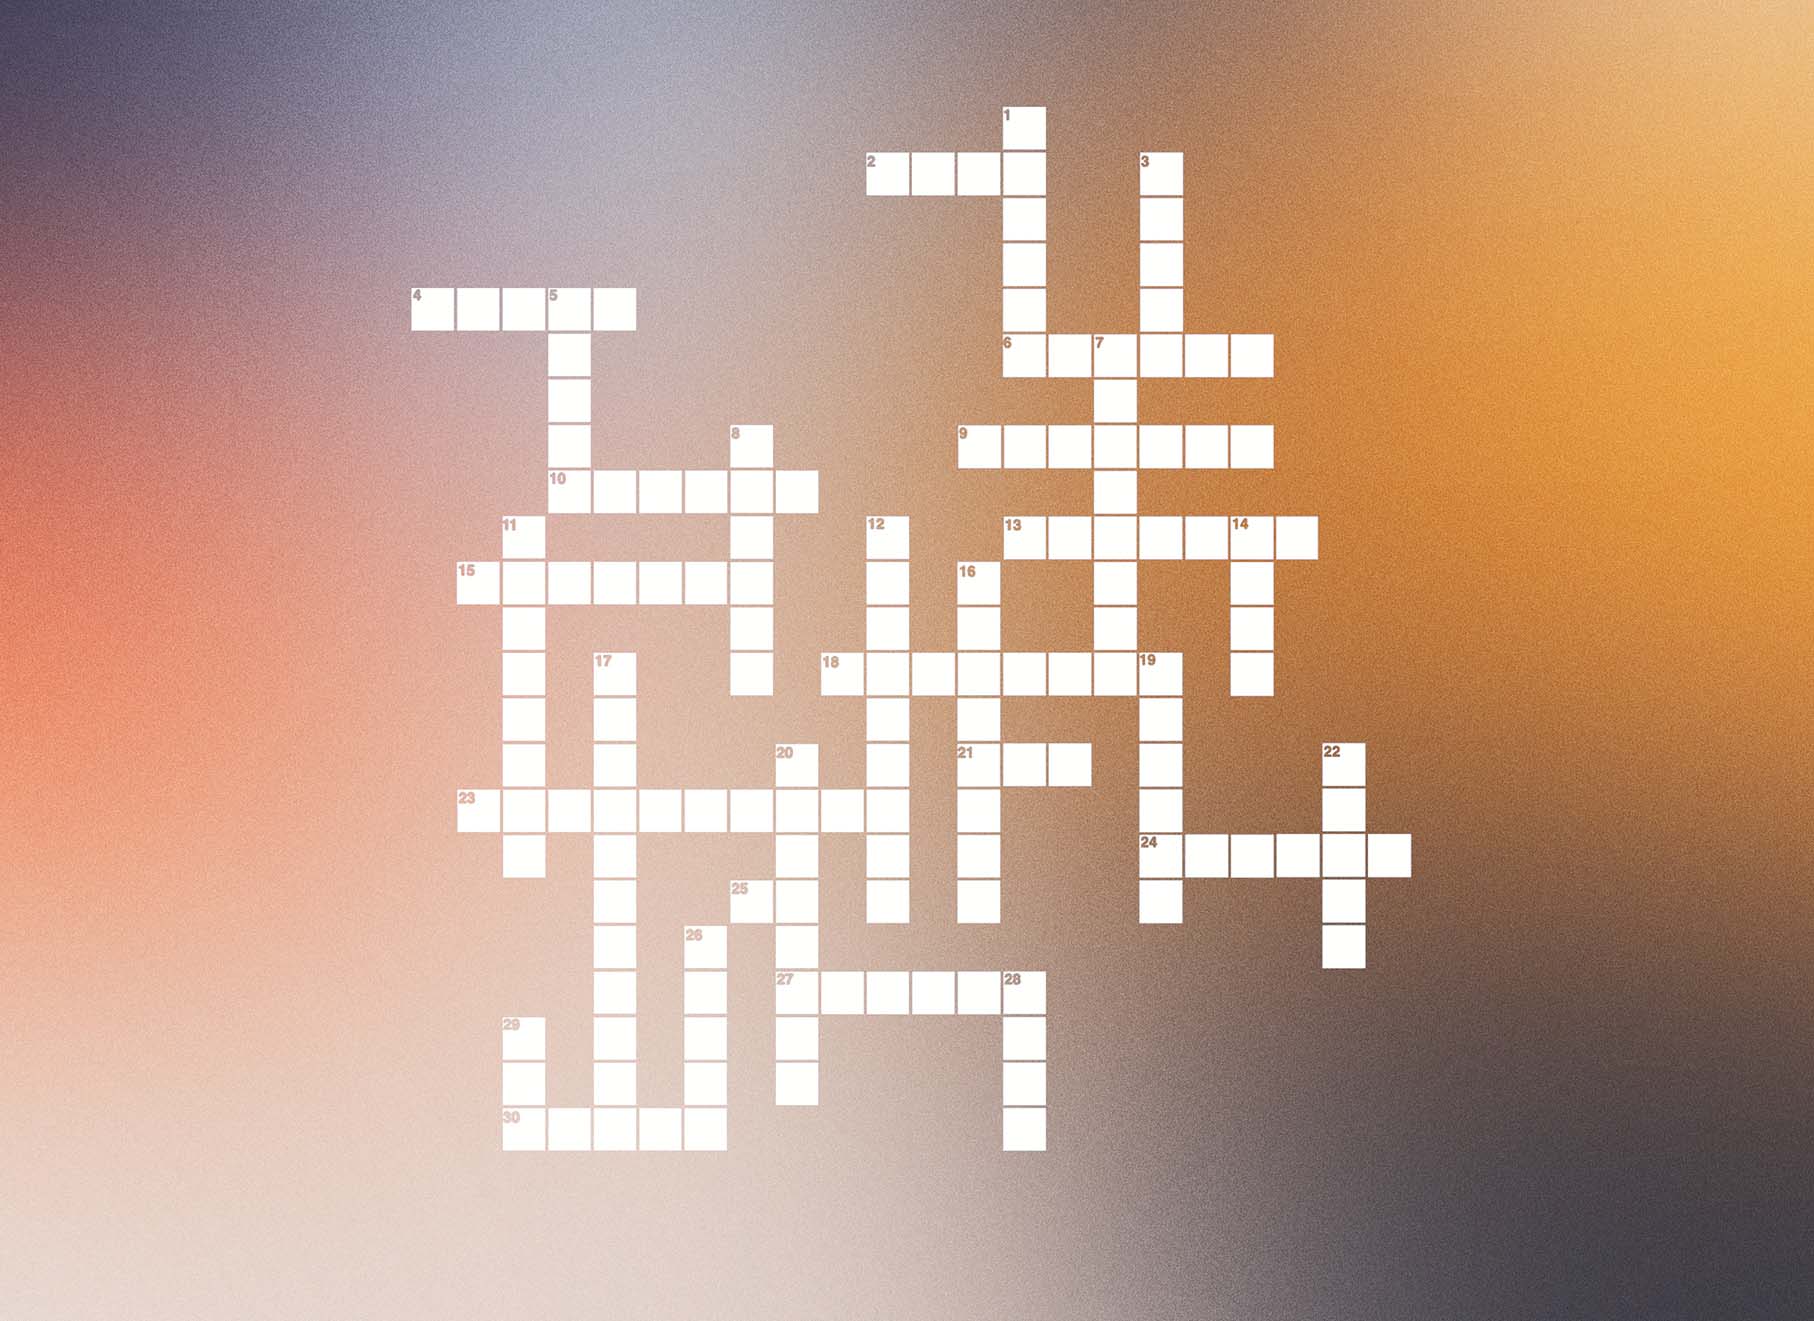 Free online crossword puzzles from Vox - Vox